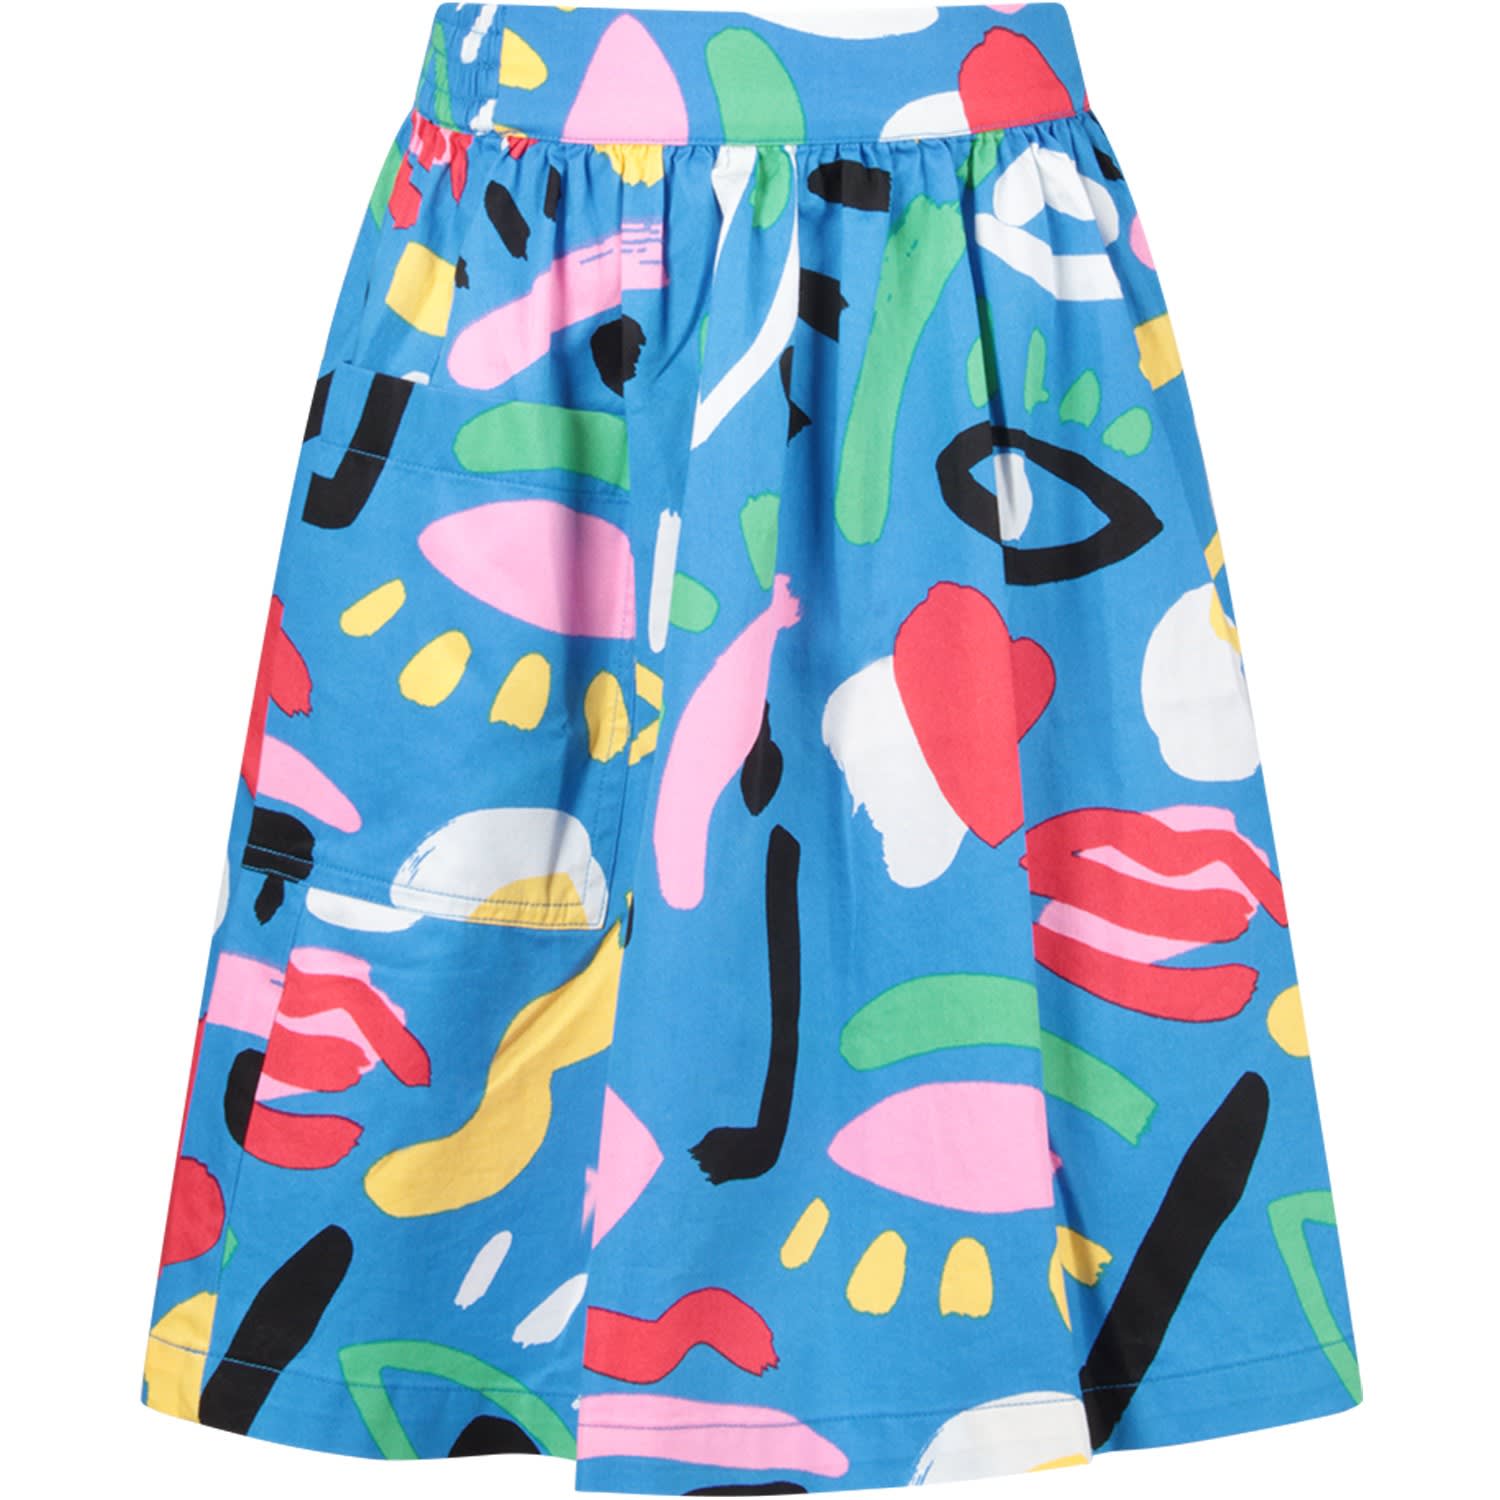 STELLA MCCARTNEY AZURE SKIRT WITH COLORFUL PRINTS FOR GIRL,11214654